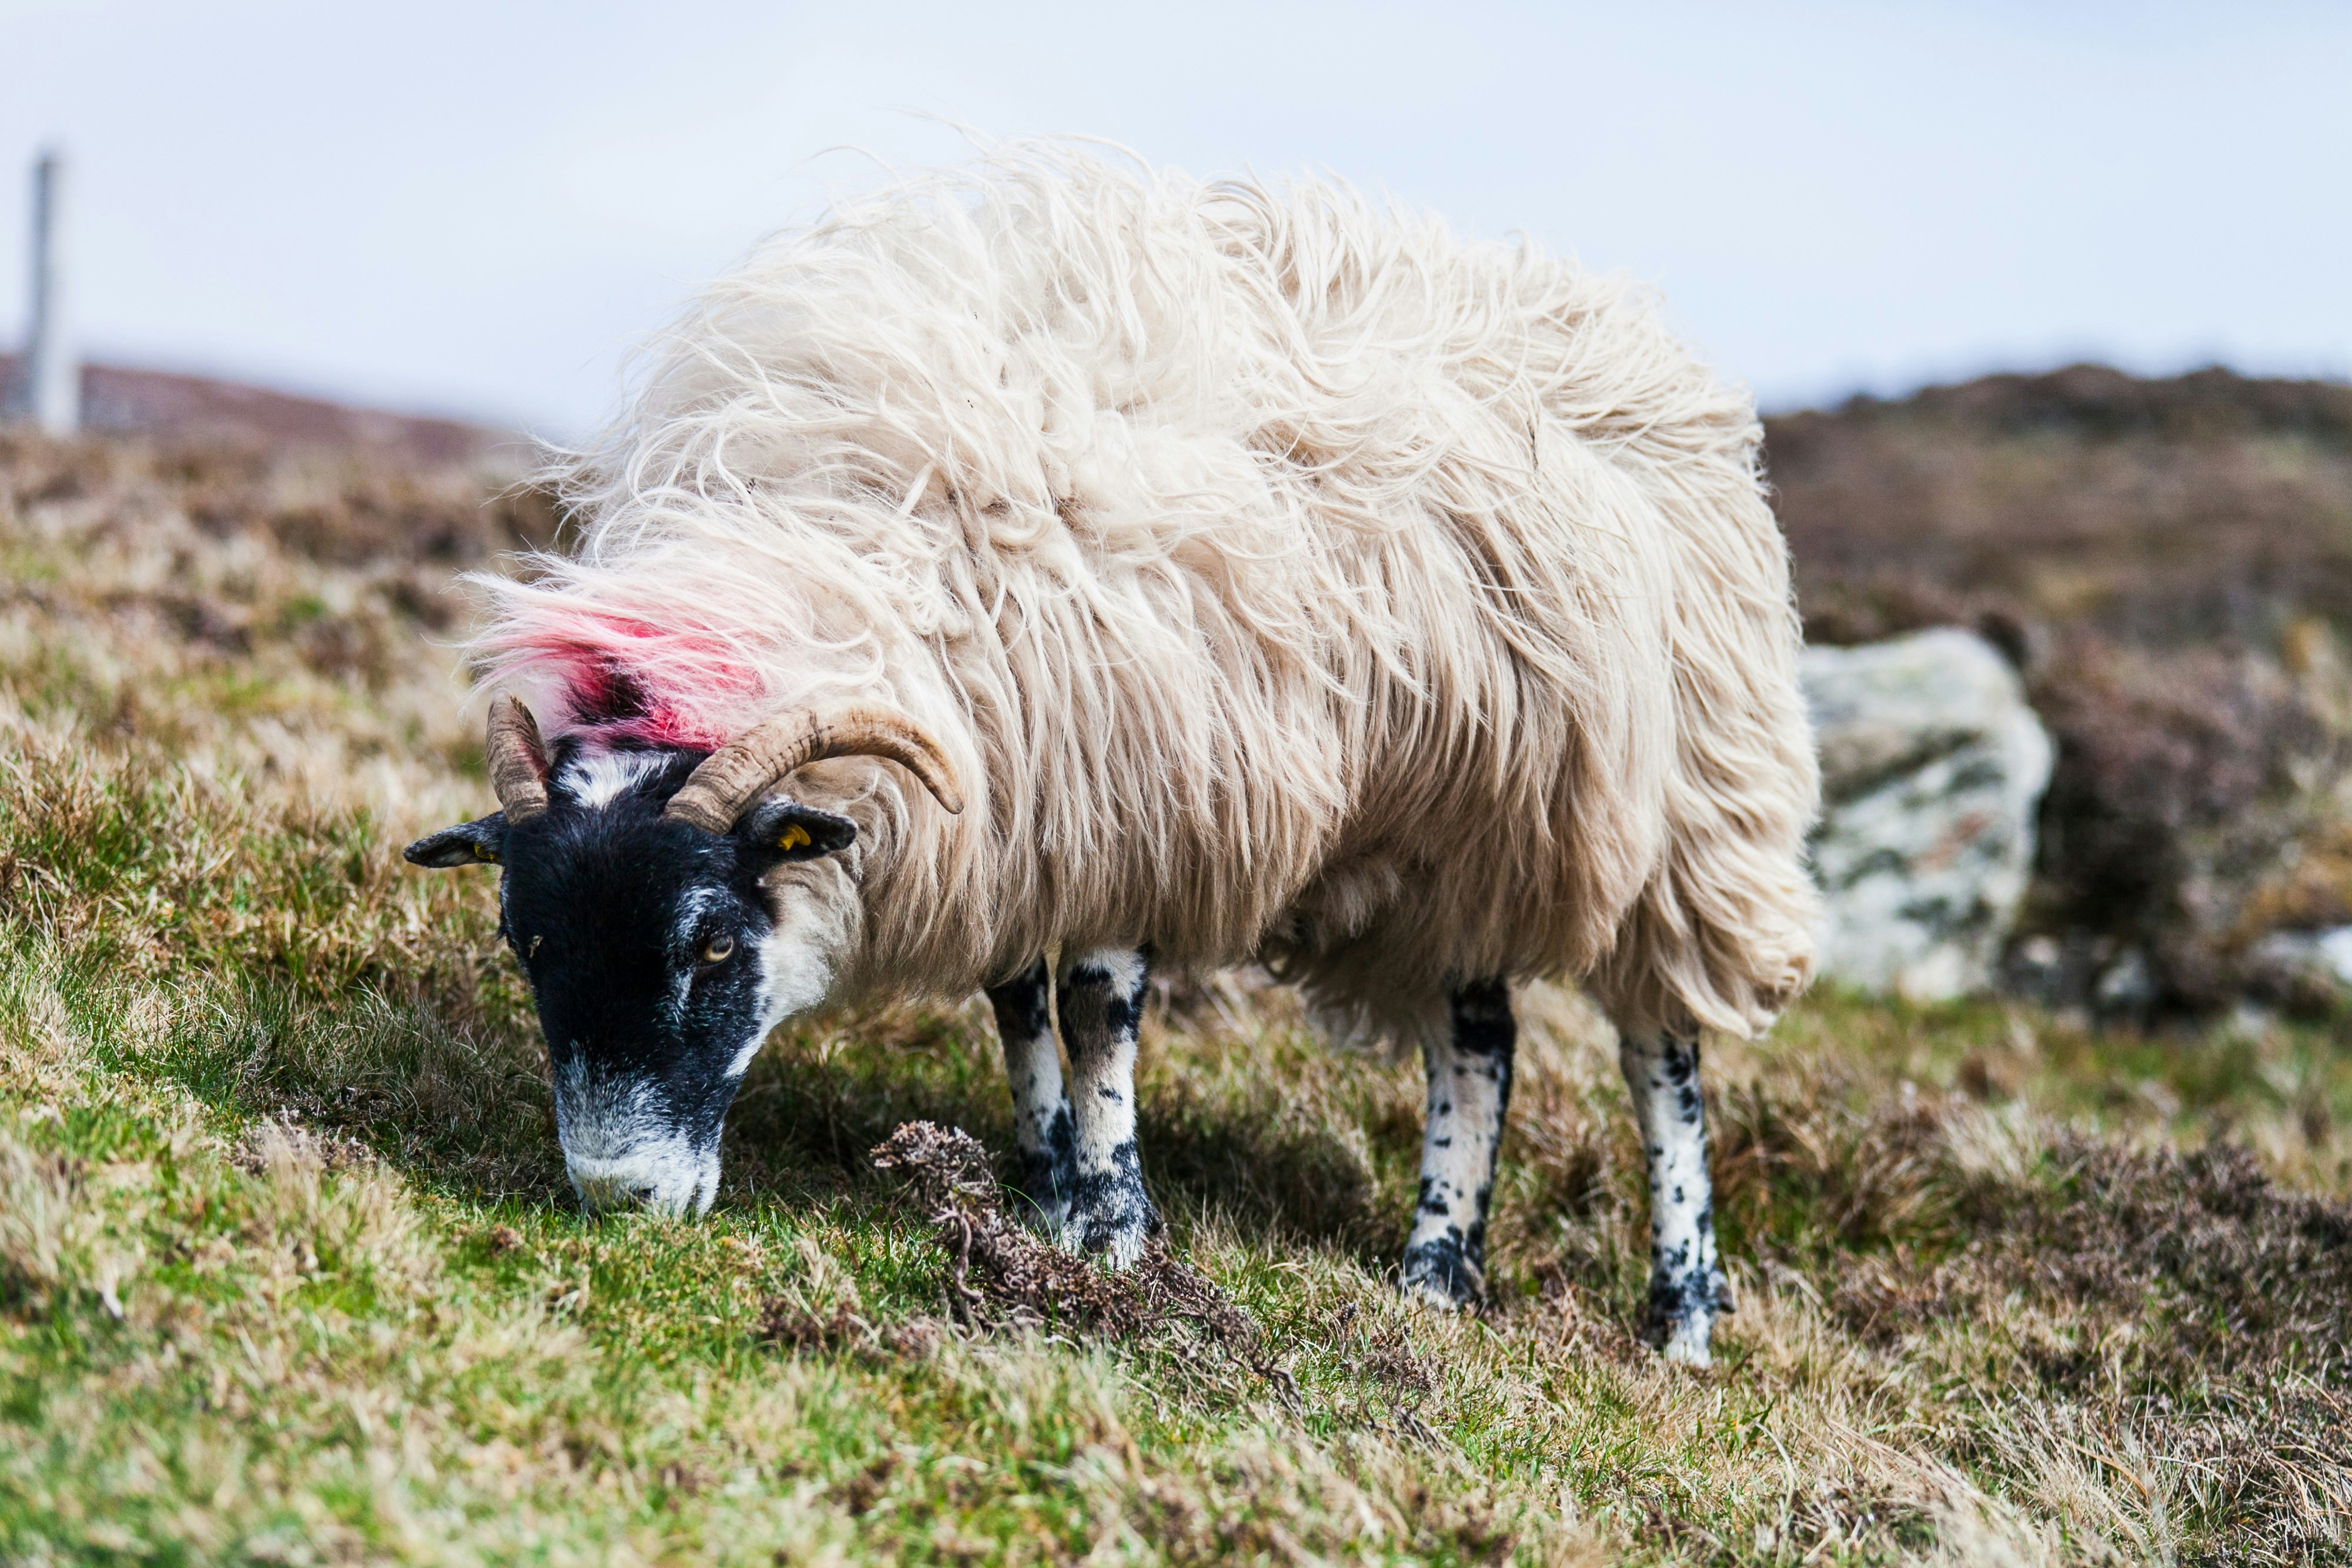 while exploring the highest seaside cliffs in europe, Slieve League, we stumbled on a group of sheep grazing along the edge of a cliff. this particular ram was not bothered by us at all, and happily continued grazing while we ate our sandwiches and shared the view.